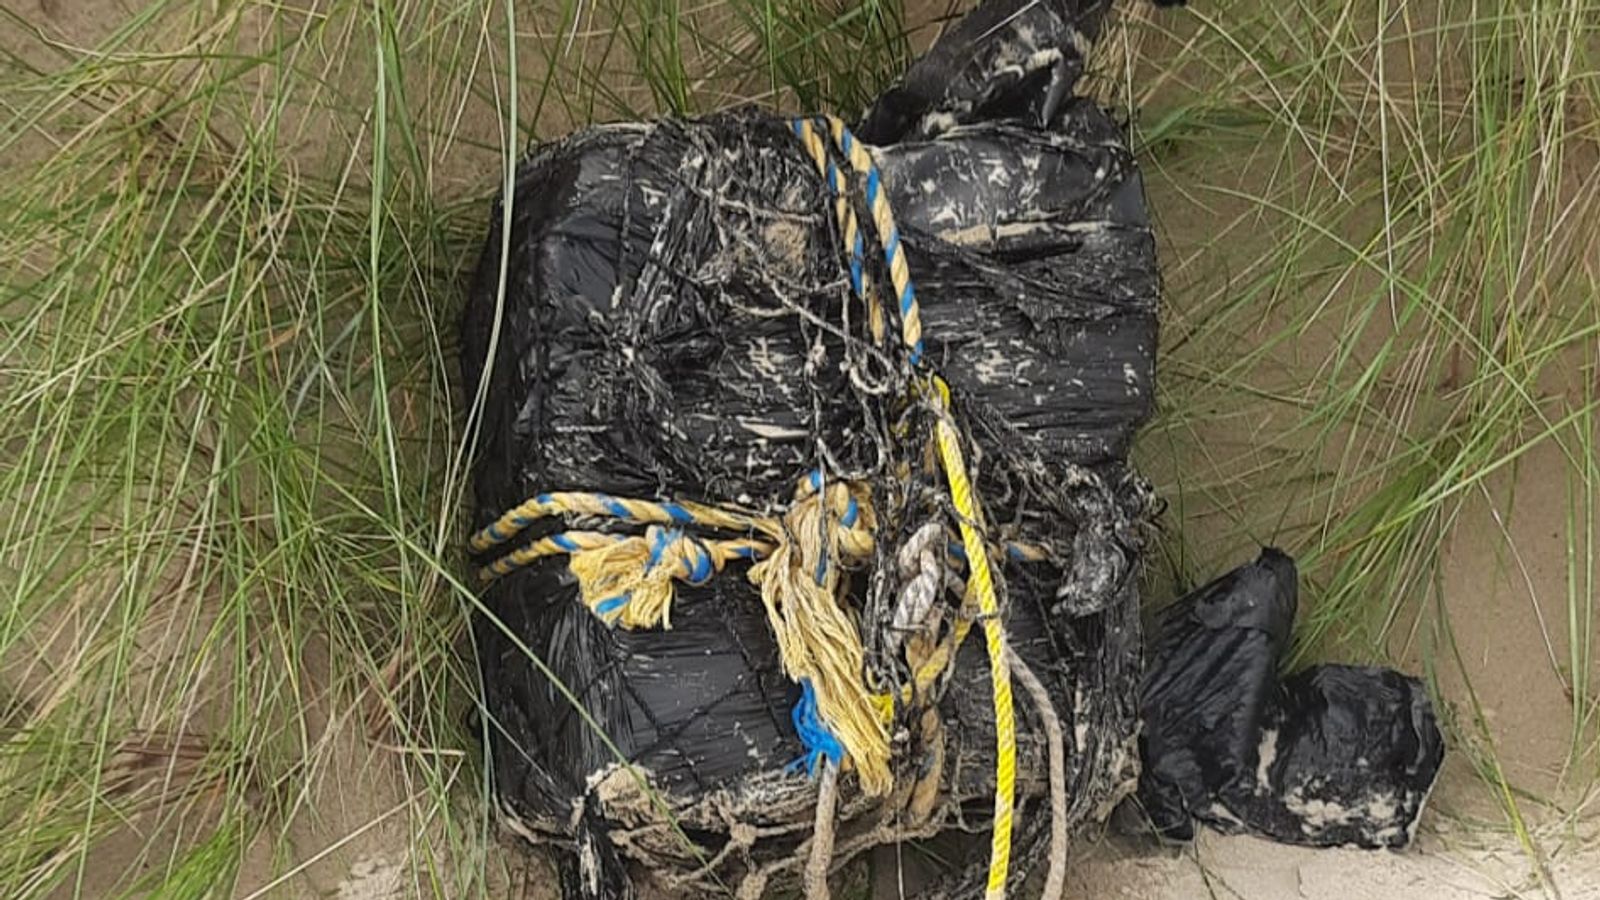 Groups of young people scour Irish beach after large bales of suspected cocaine wash ashore